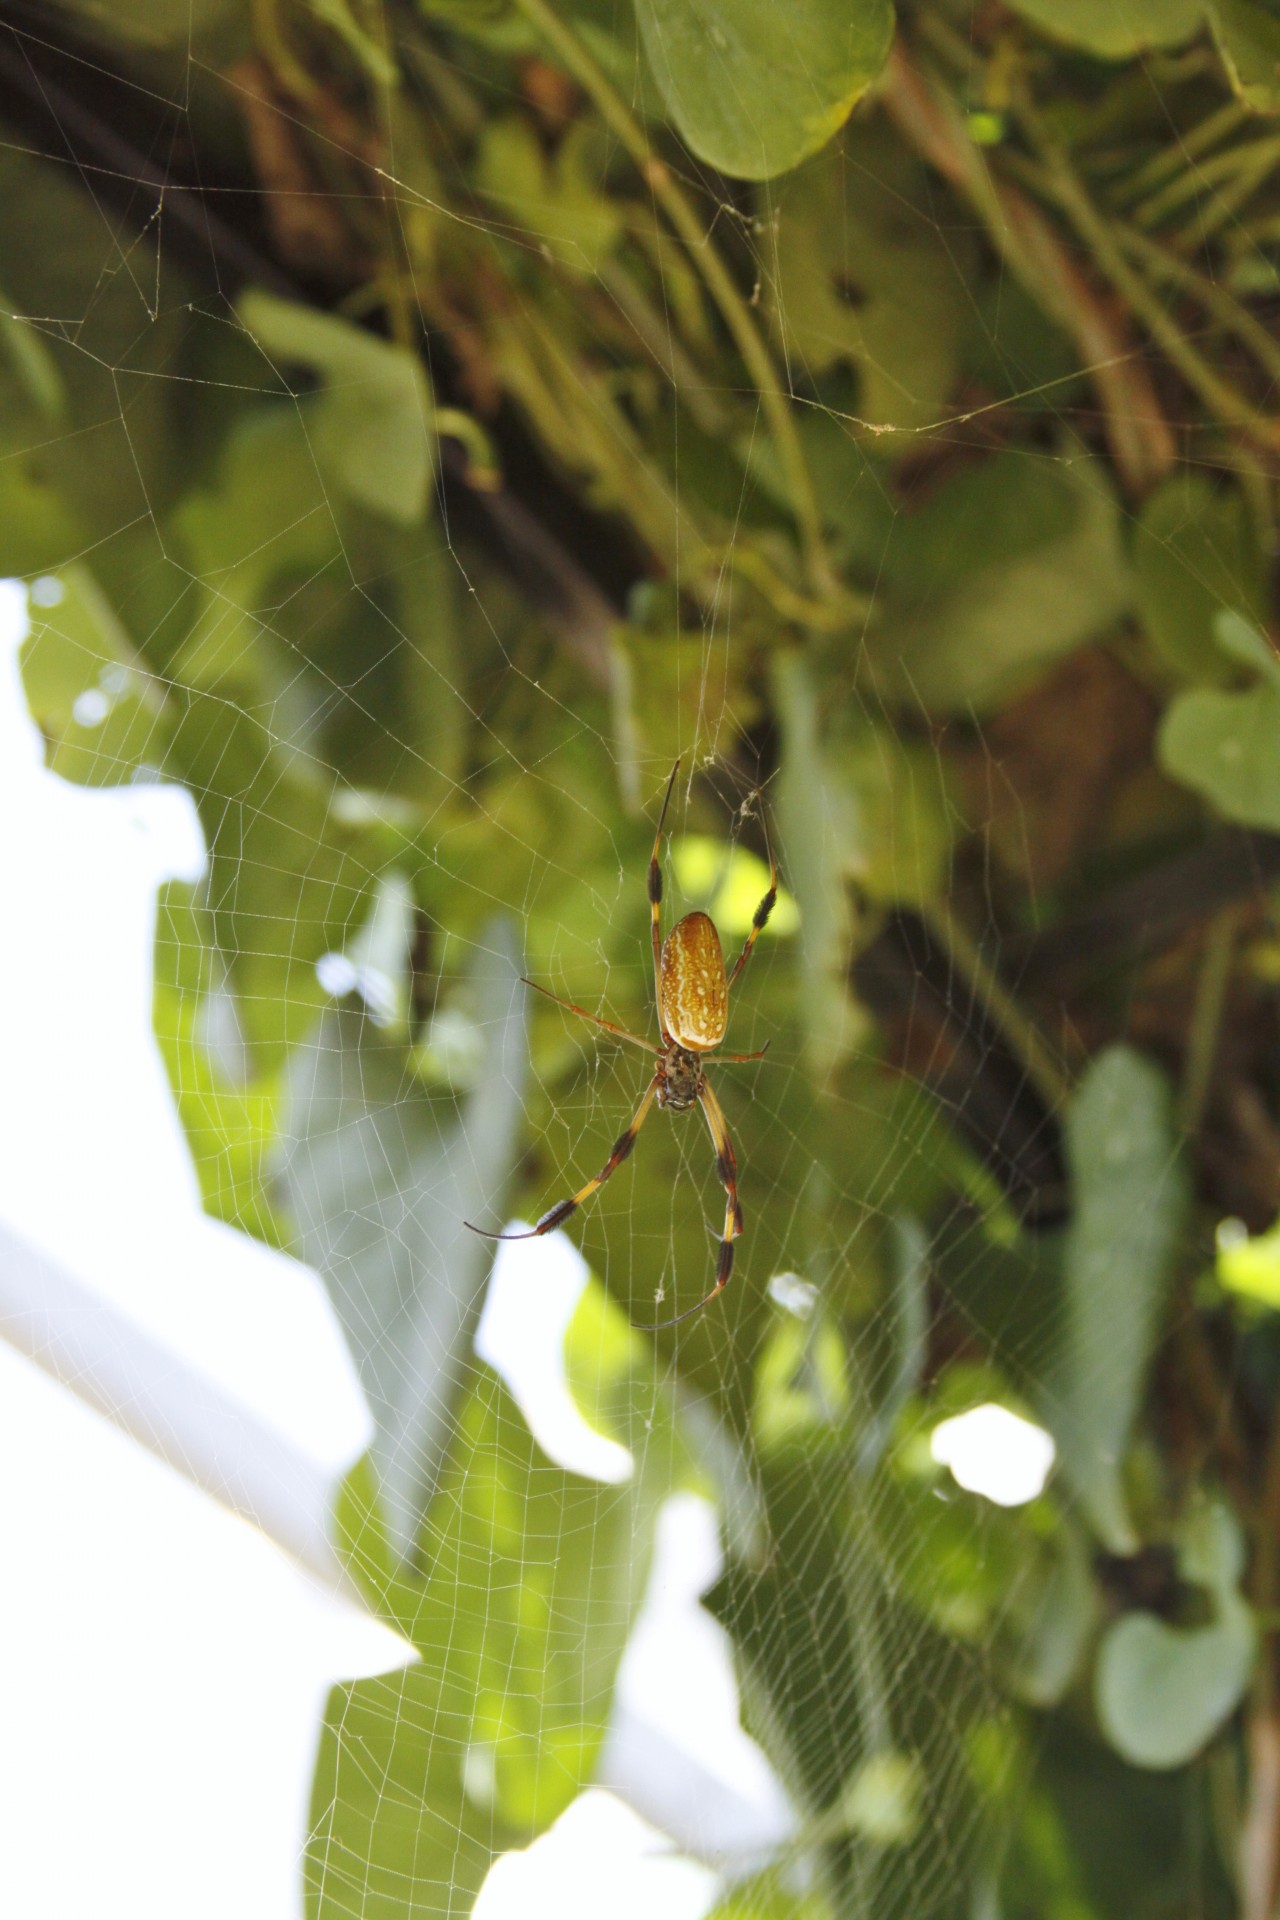 Orange, black and yellow spider on a web